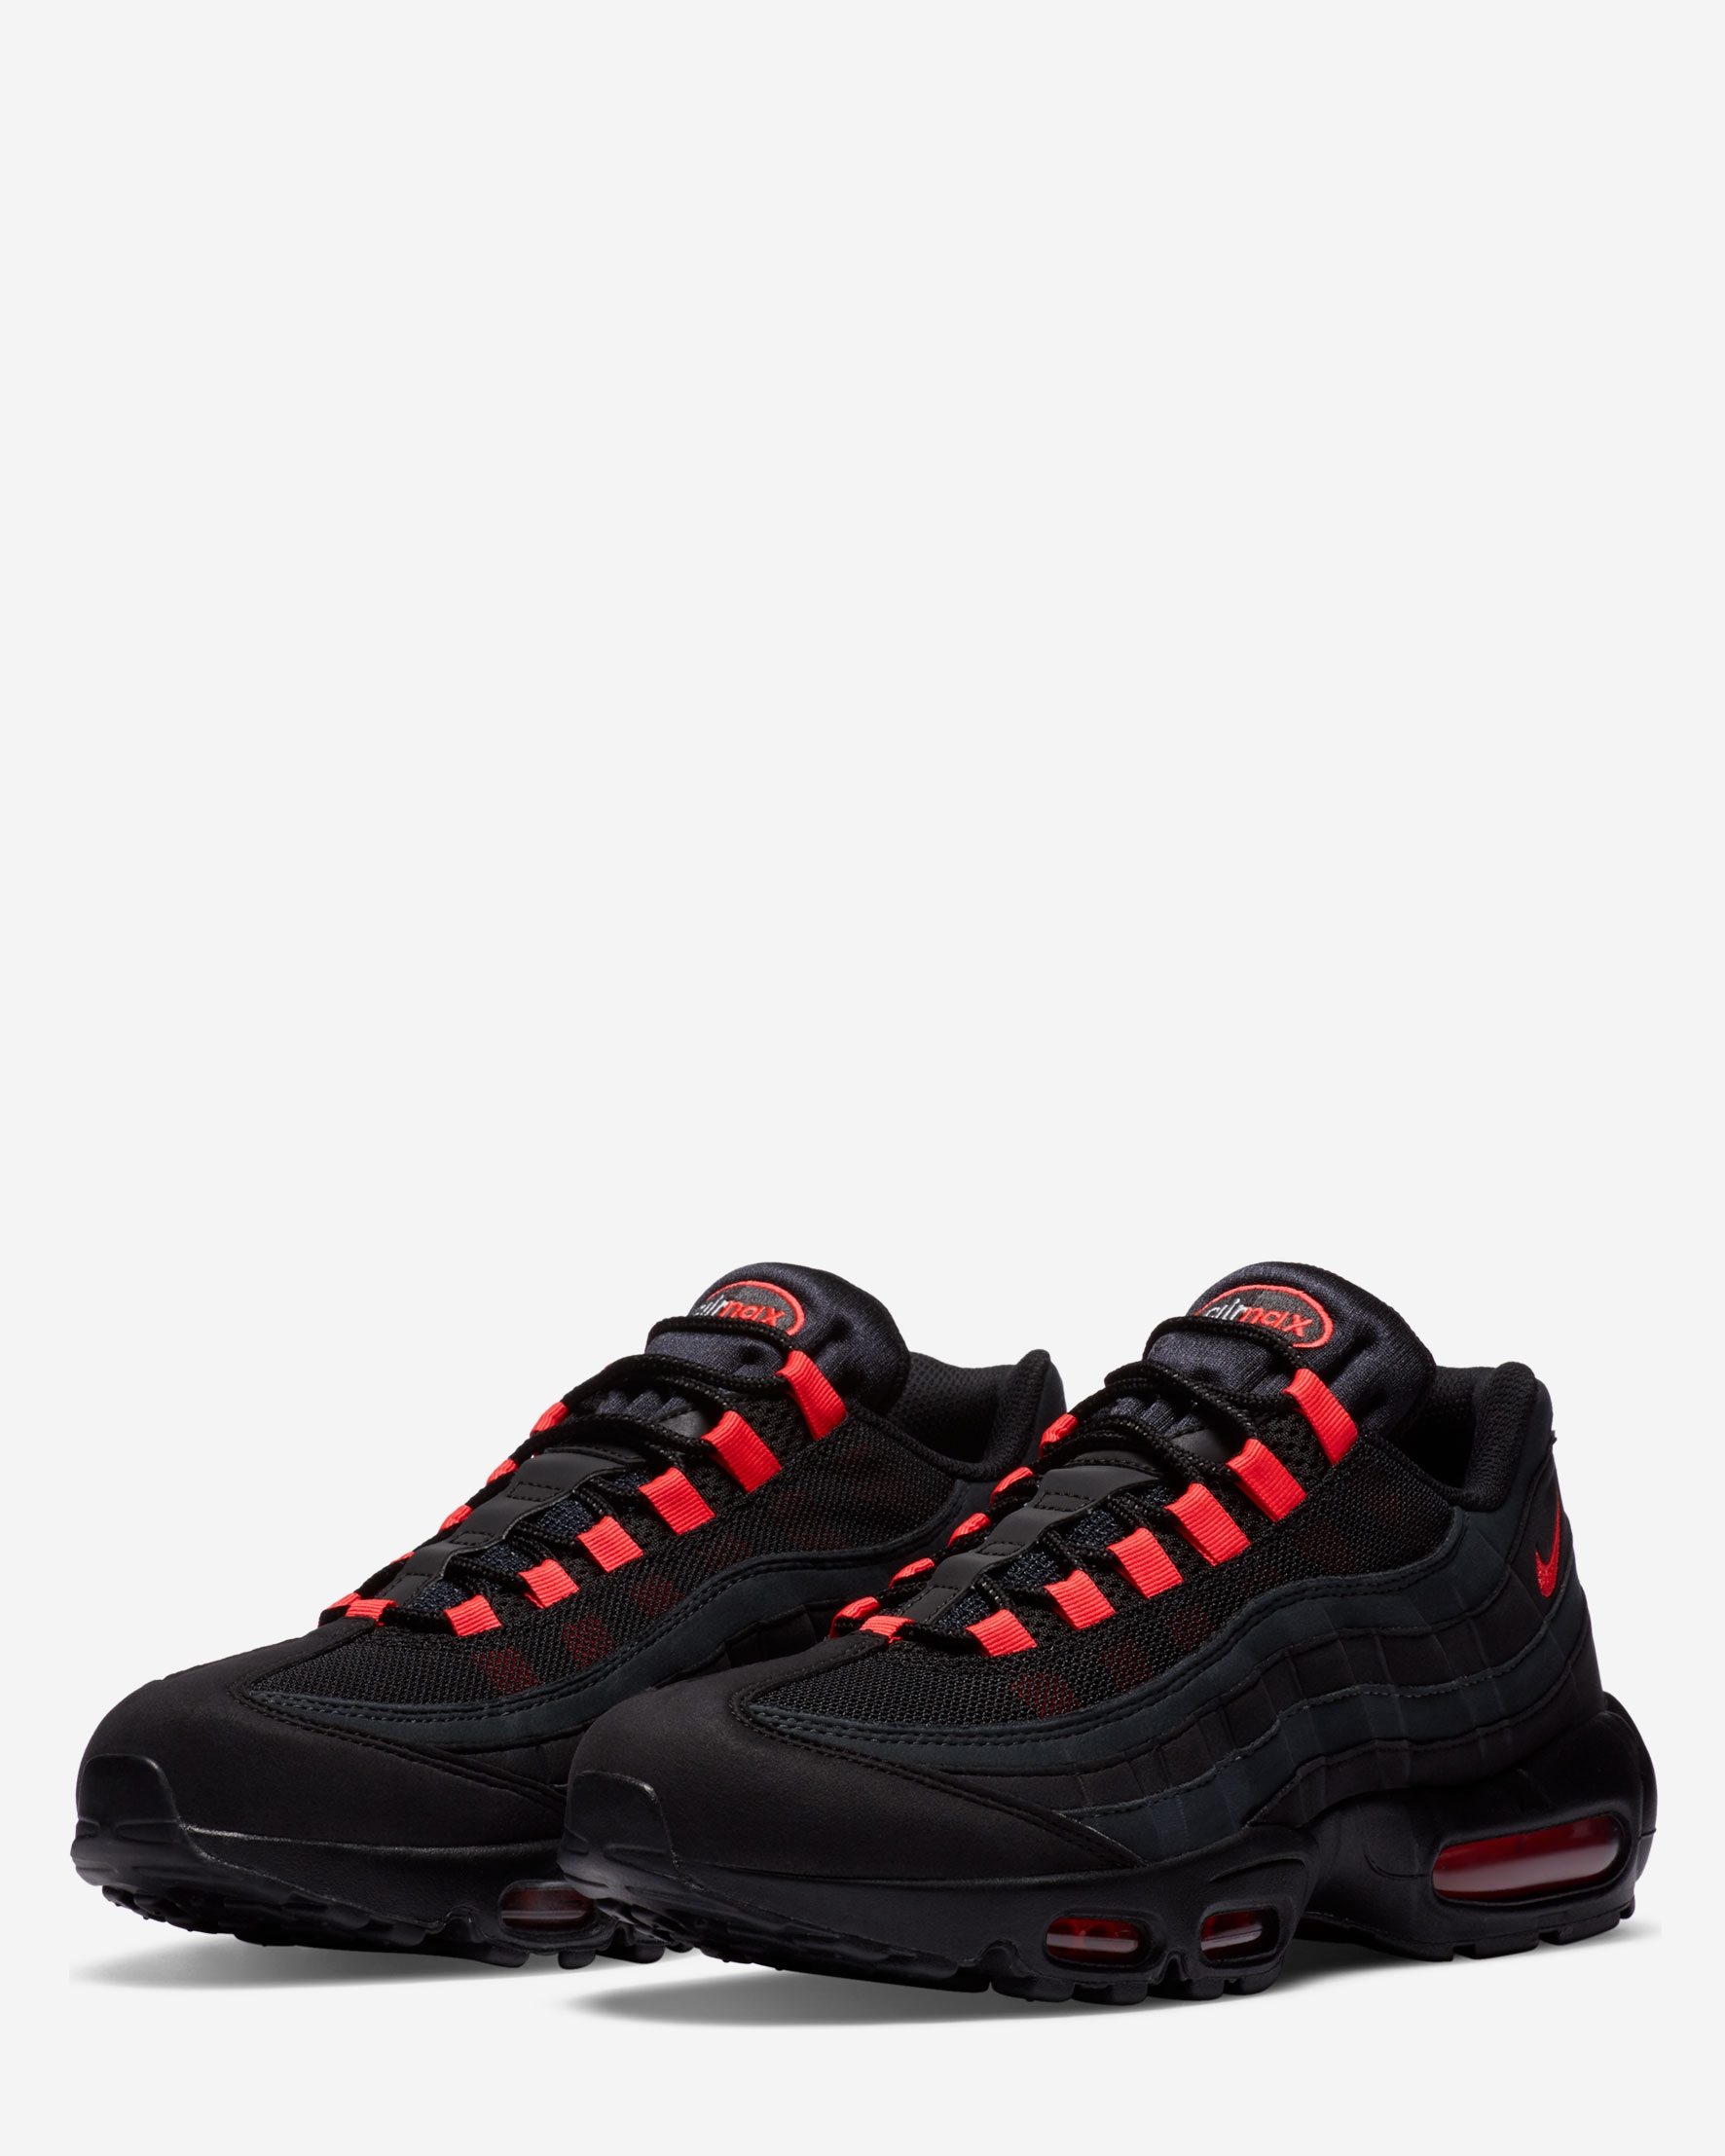 I will be strong Larry Belmont Risky LFC Nike Mens Air Max 95